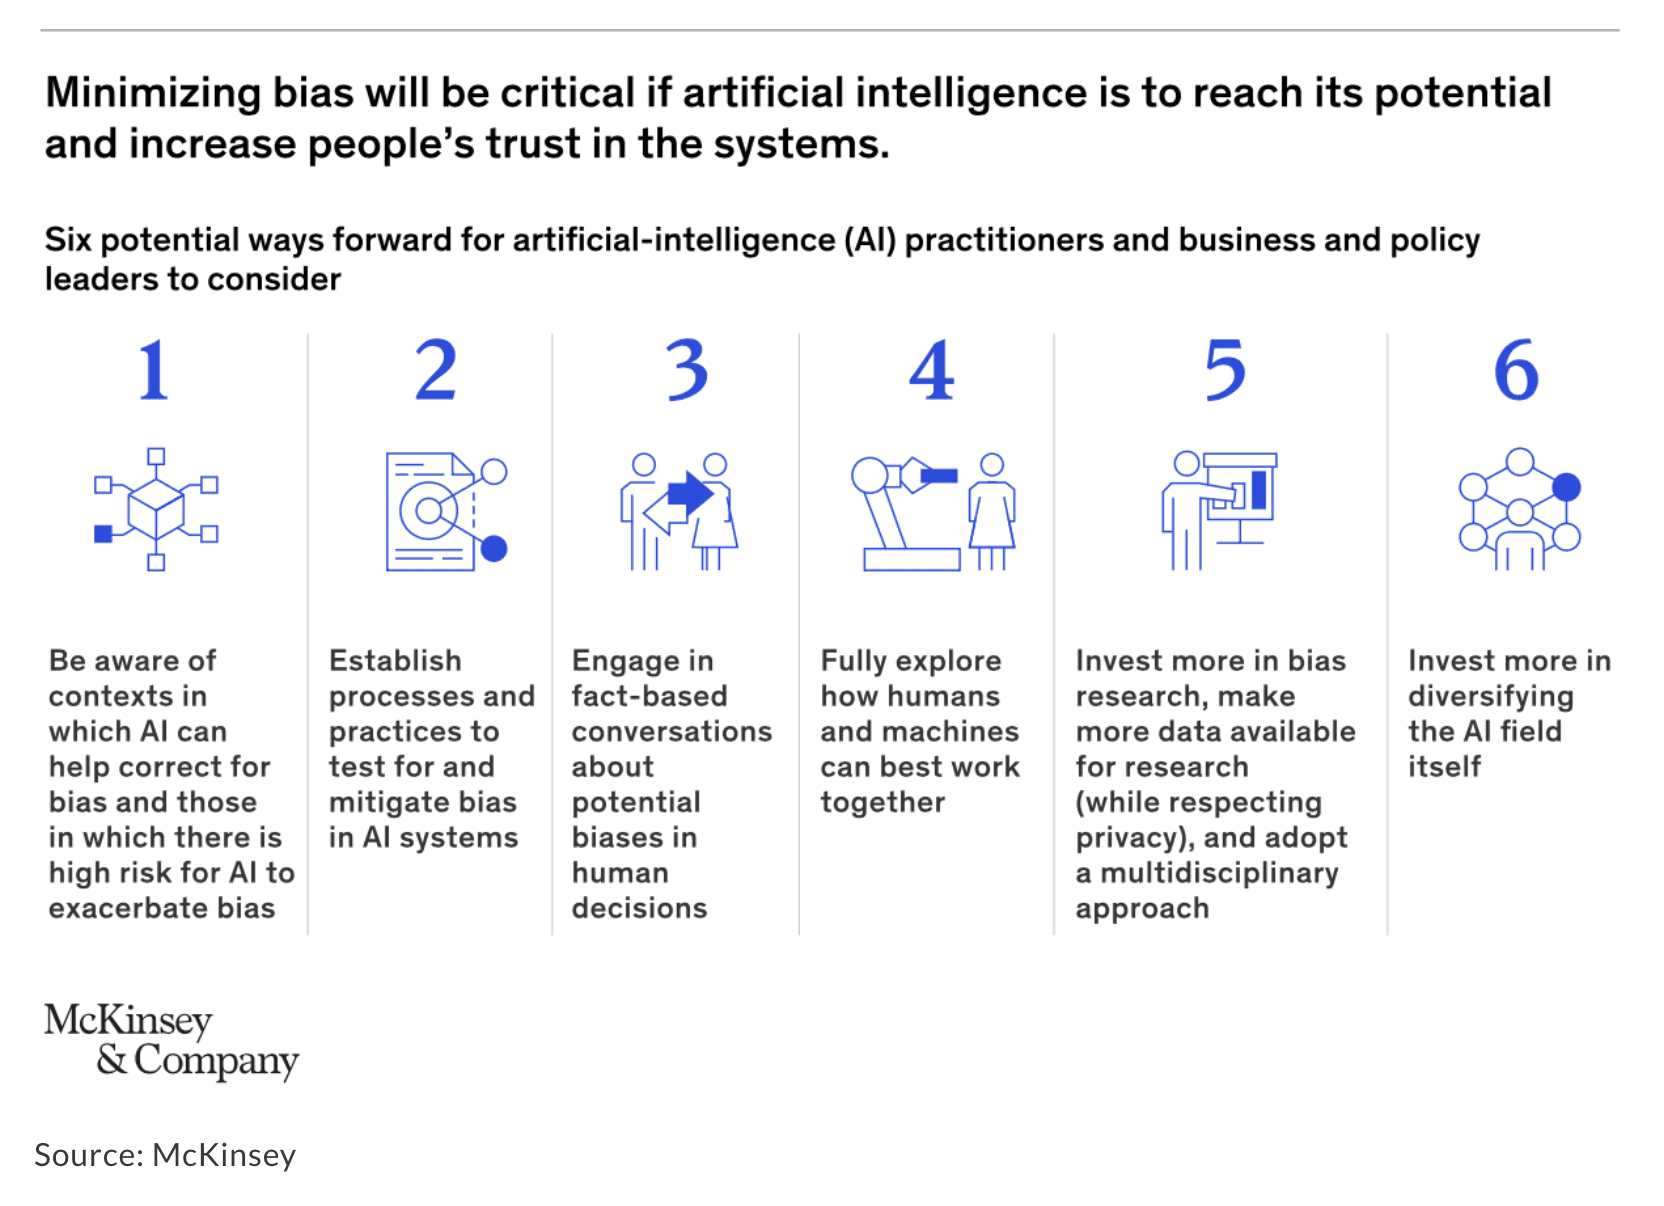 McKinsey suggested methods for avoiding AI Bias